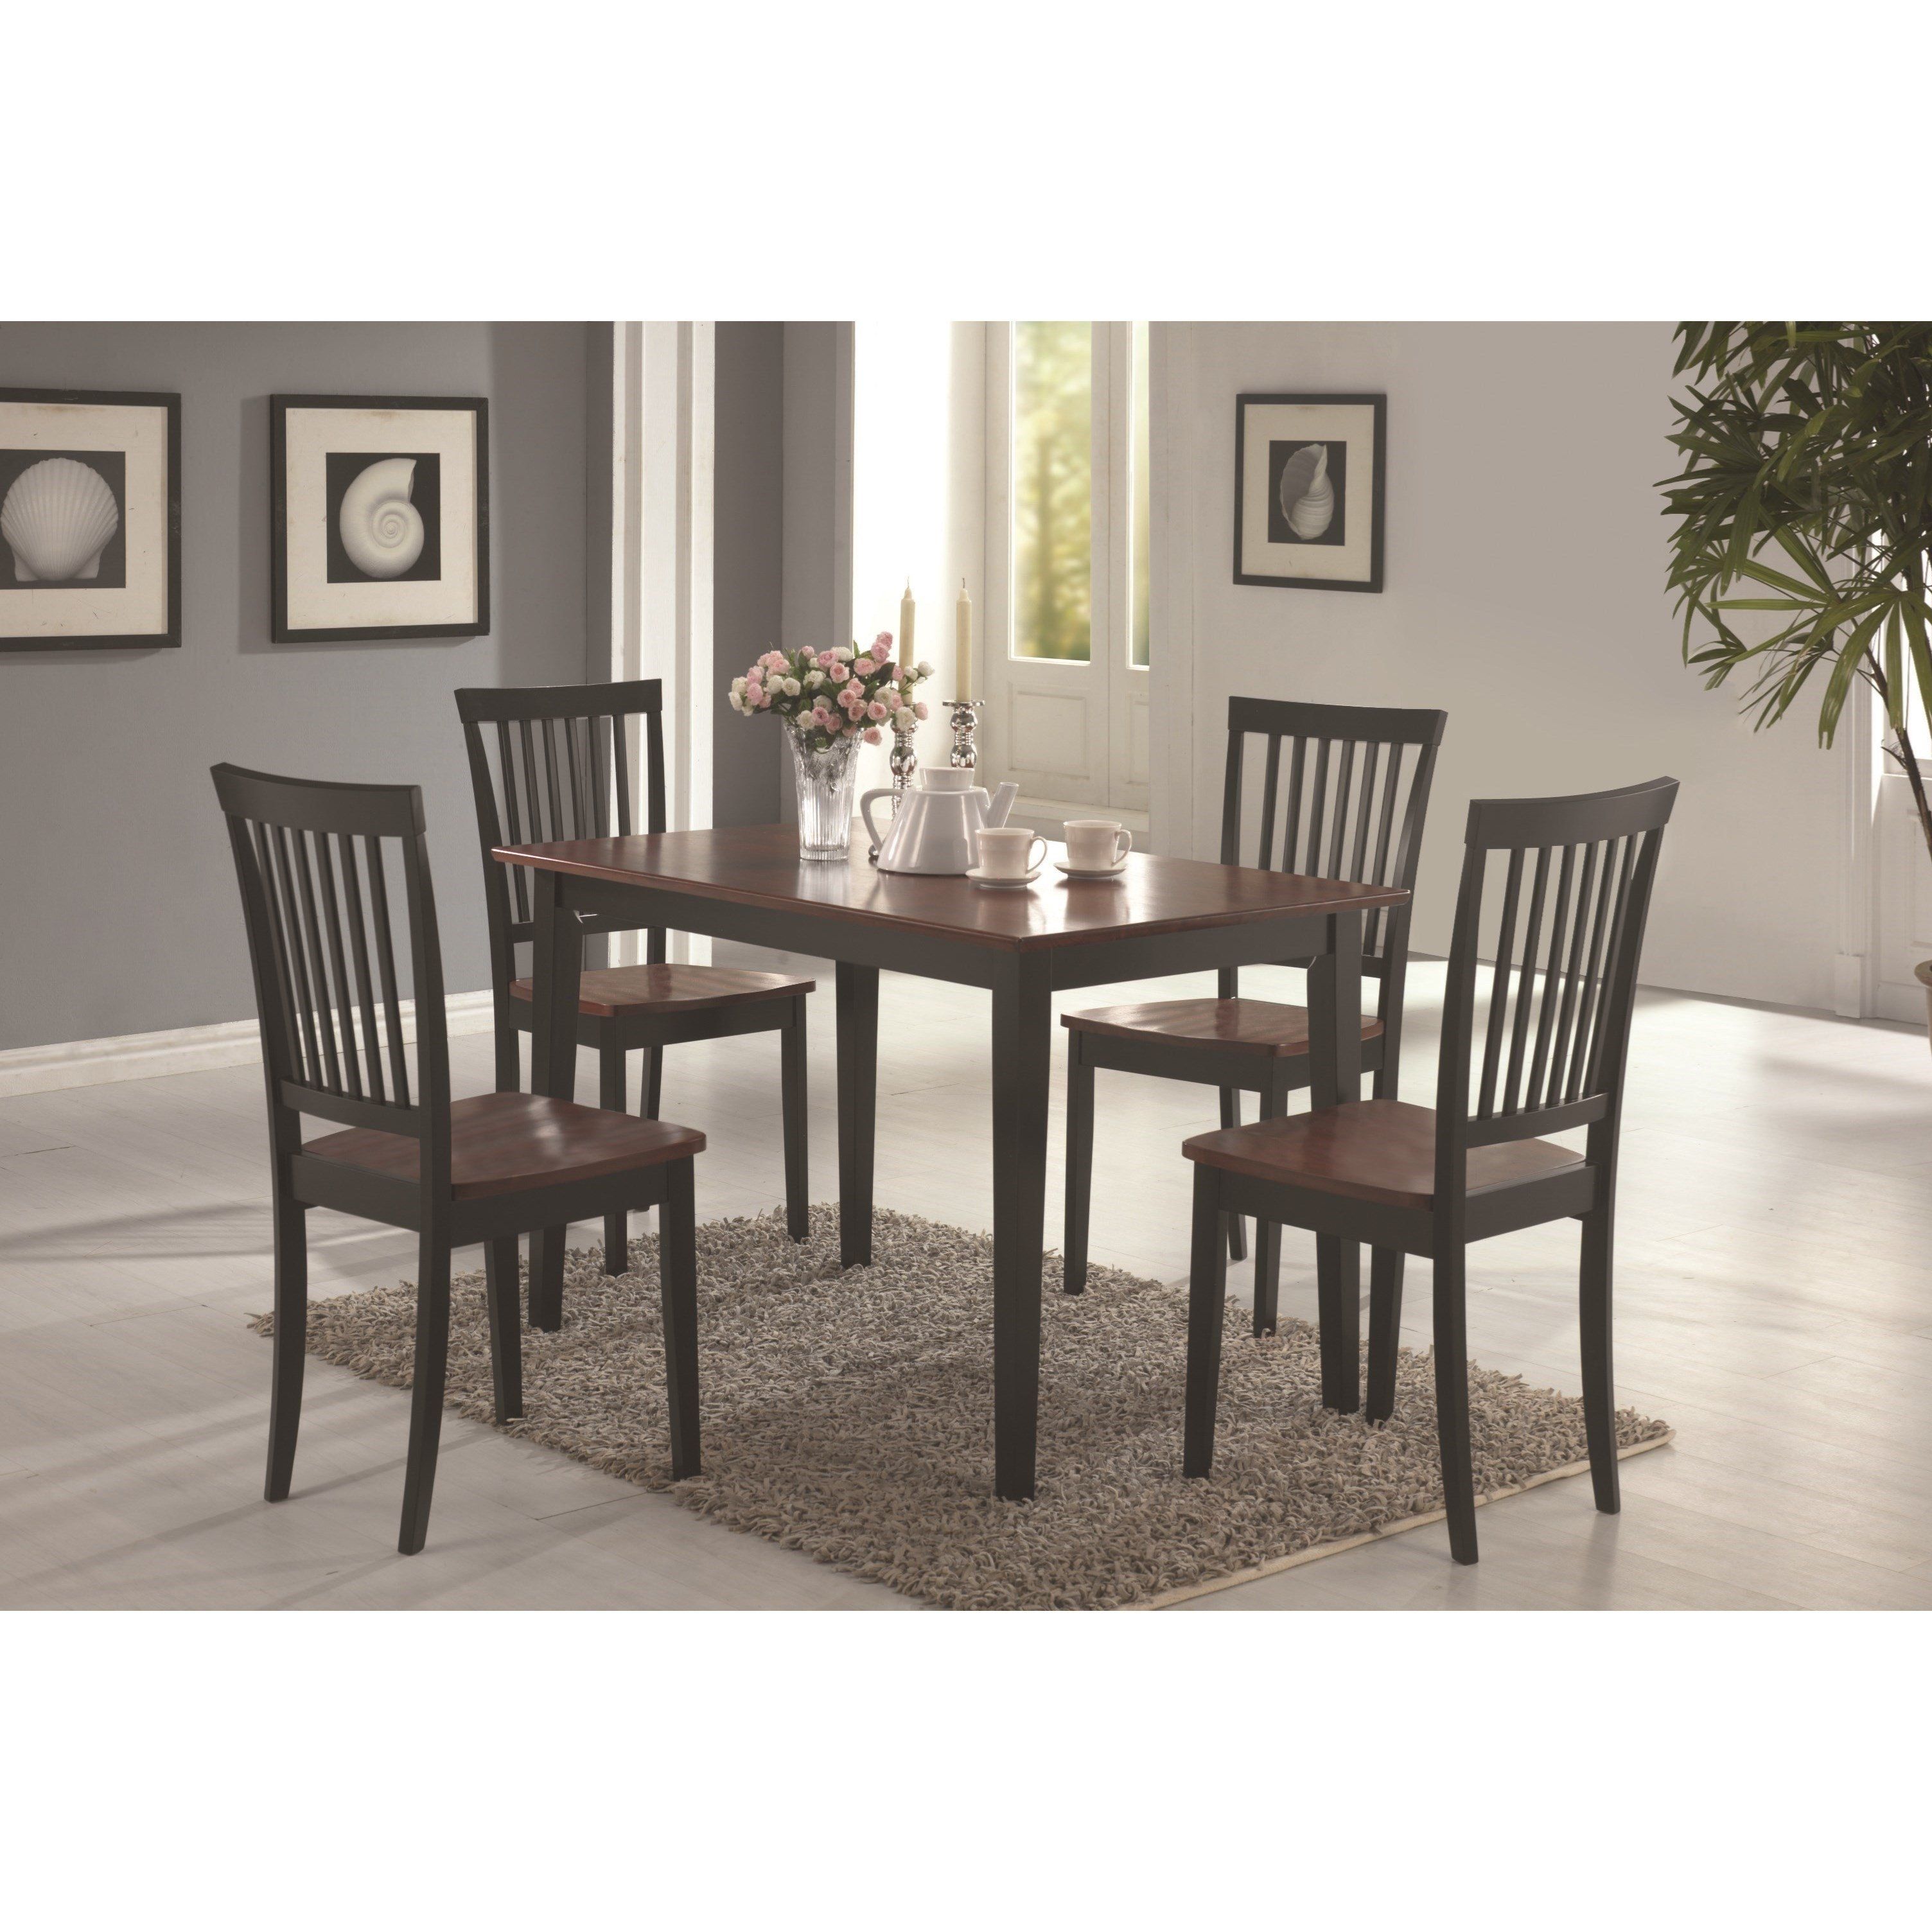 Charlton Home Pugh Sturdy Wooden 5 Piece Dining Set | Wayfair Inside 2017 Candice Ii 7 Piece Extension Rectangular Dining Sets With Slat Back Side Chairs (View 9 of 20)